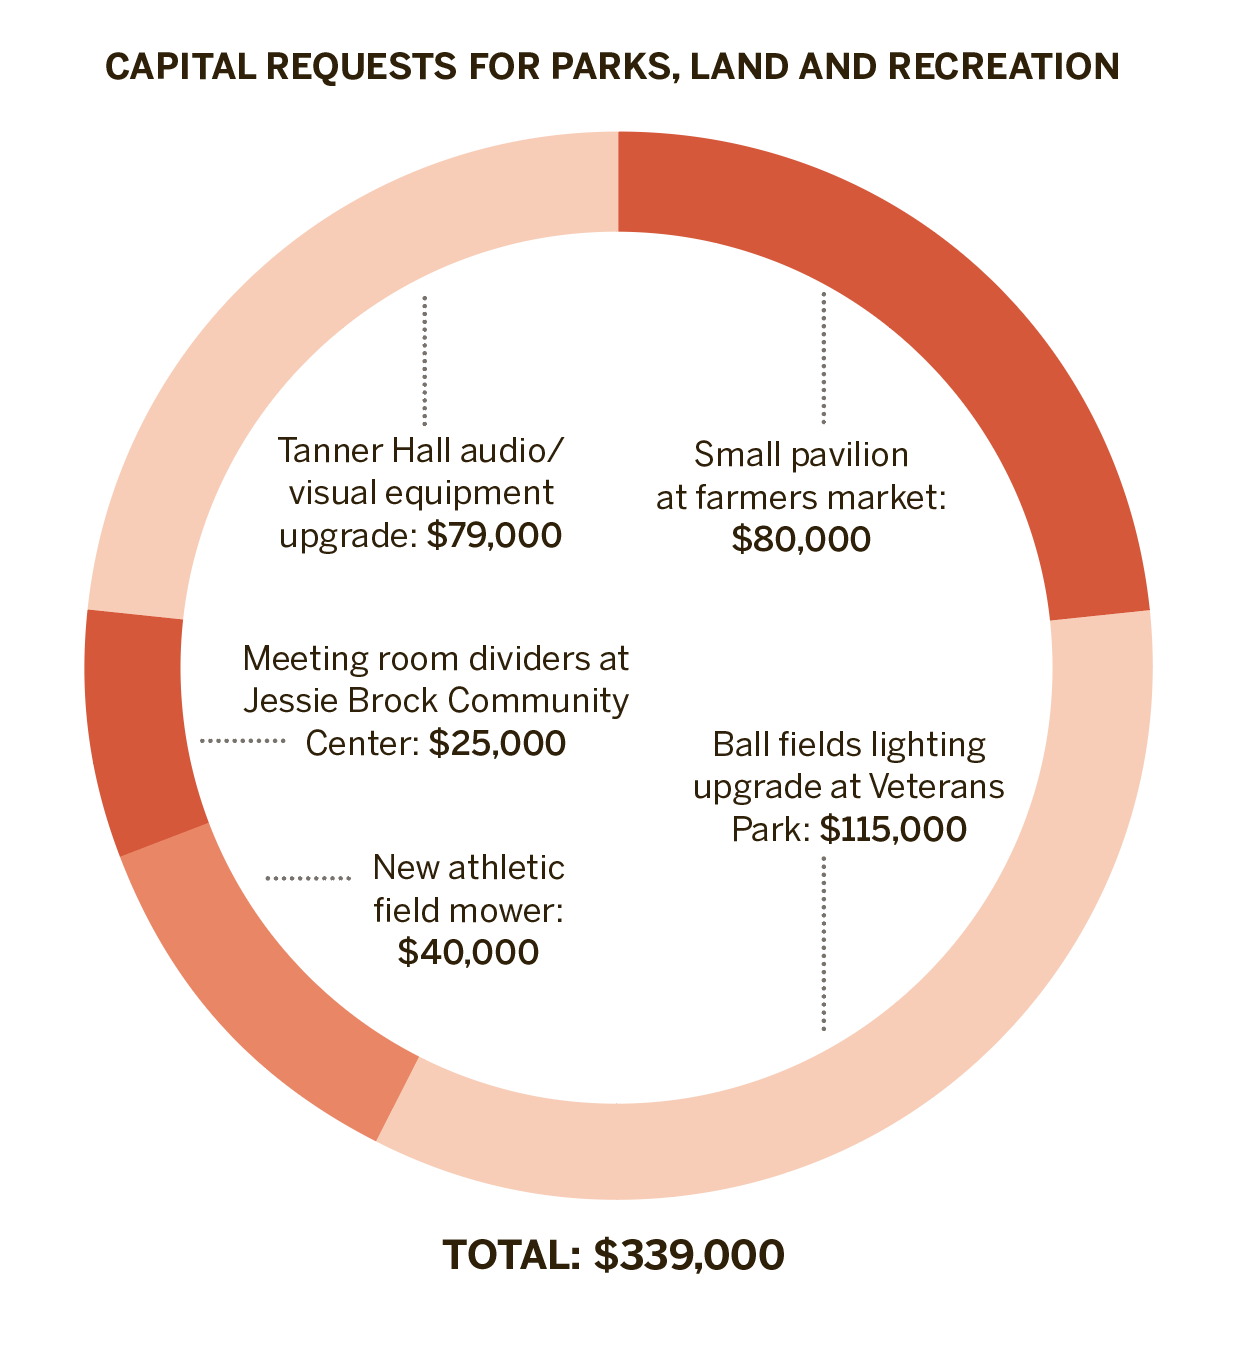 Fiscal Year 2020-21's capital requests for Winter Garden parks, land and recreation.